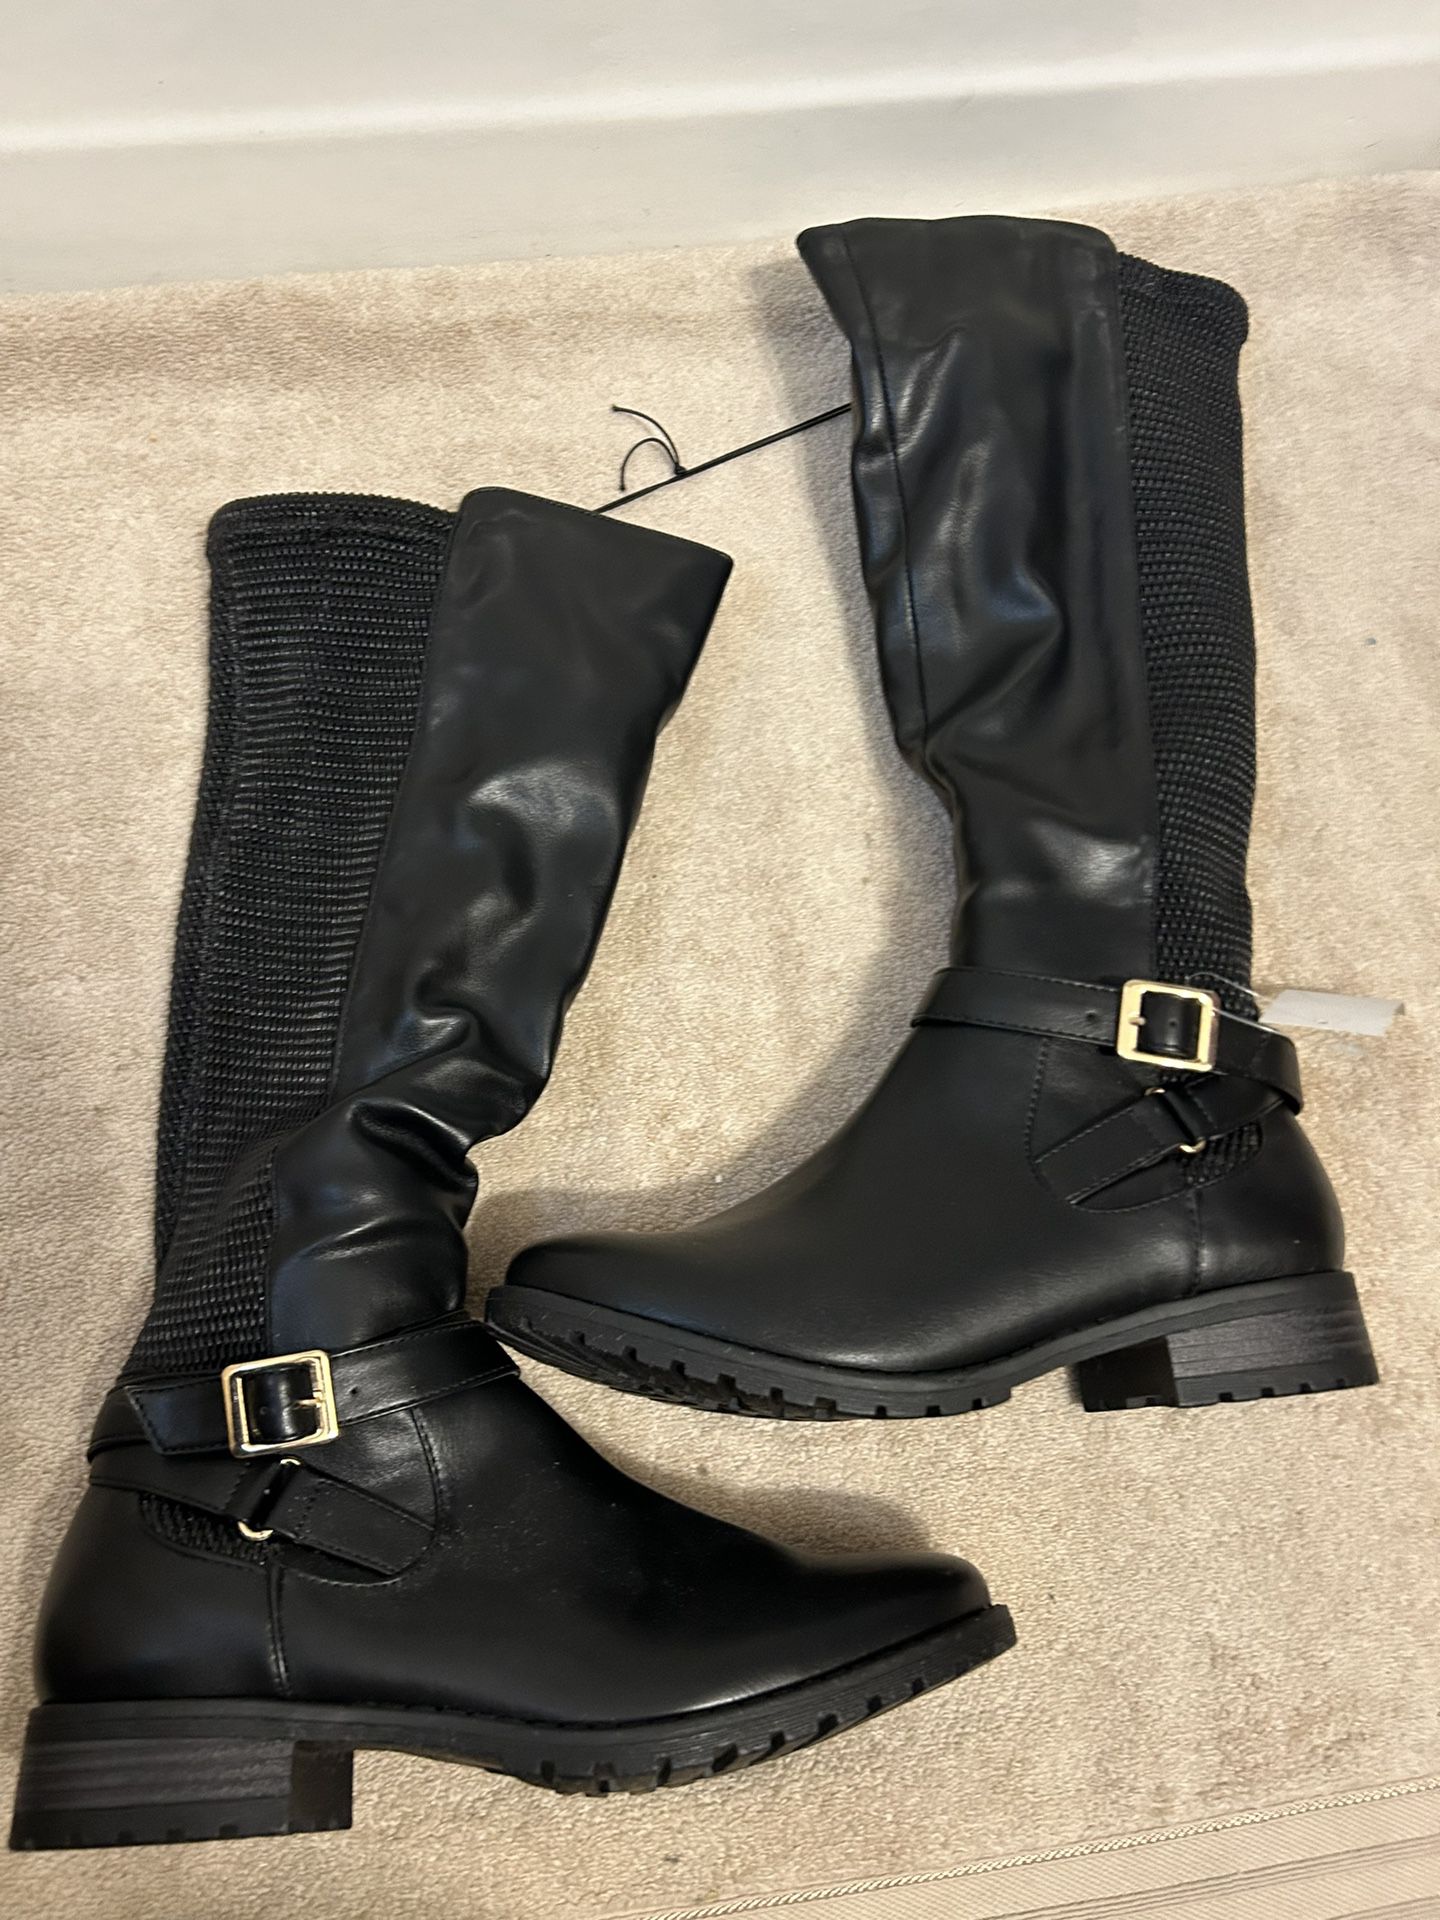 New Black Boots With Side Zipper And Gold Buckle